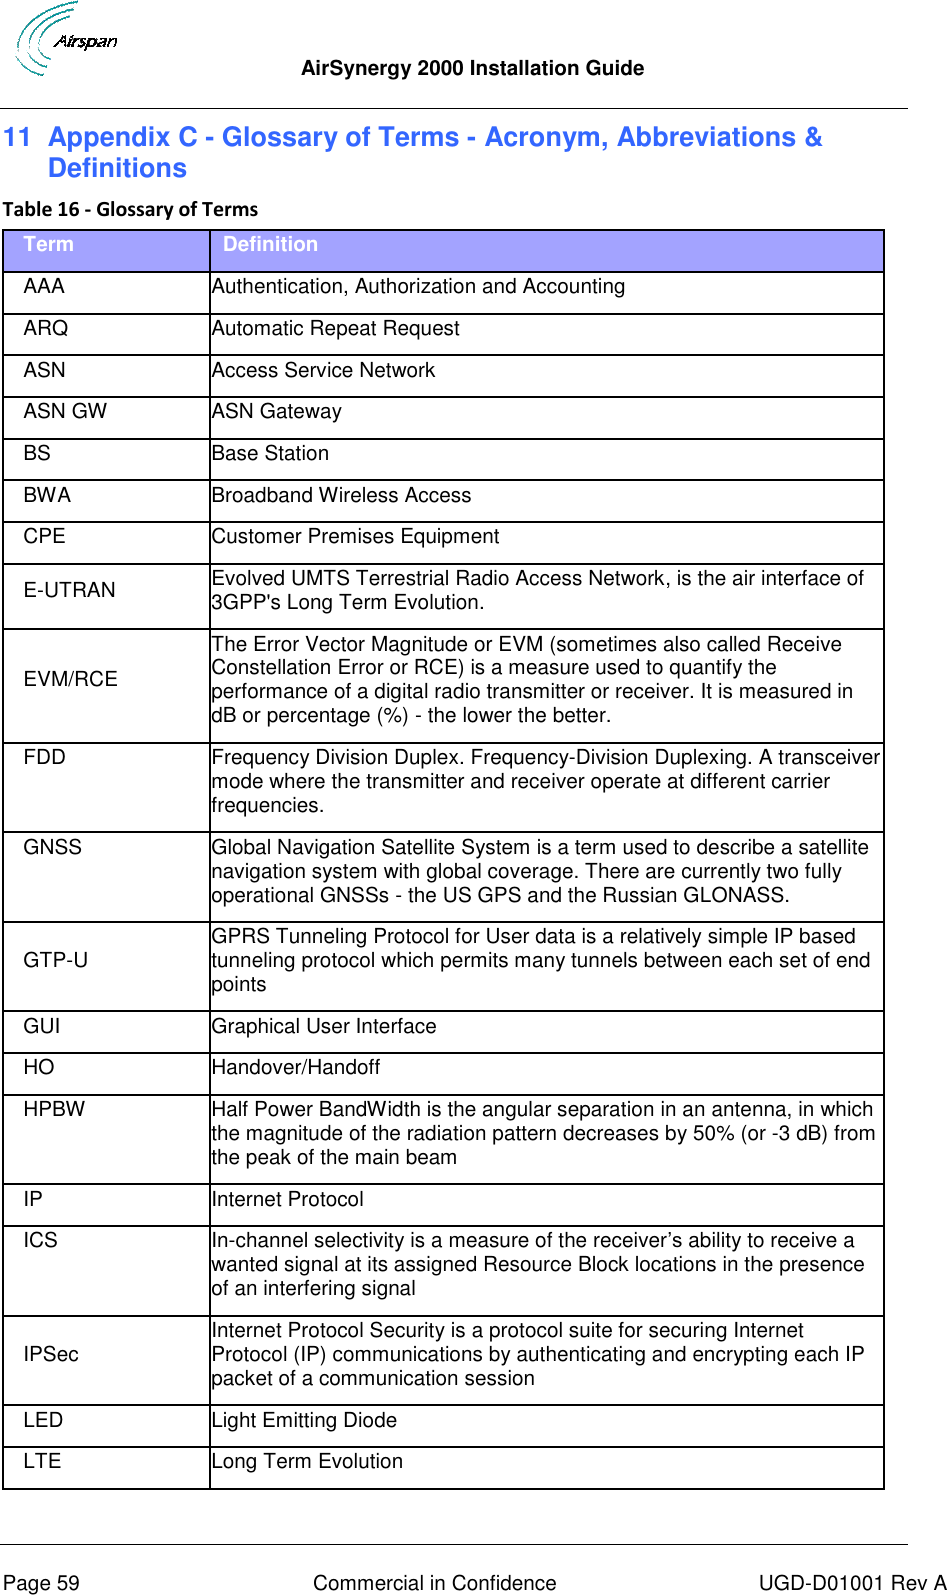  AirSynergy 2000 Installation Guide     Page 59  Commercial in Confidence  UGD-D01001 Rev A 11  Appendix C - Glossary of Terms - Acronym, Abbreviations &amp; Definitions Table 16 - Glossary of Terms Term   Definition AAA Authentication, Authorization and Accounting ARQ Automatic Repeat Request ASN Access Service Network ASN GW ASN Gateway BS Base Station BWA Broadband Wireless Access CPE Customer Premises Equipment E-UTRAN Evolved UMTS Terrestrial Radio Access Network, is the air interface of 3GPP&apos;s Long Term Evolution. EVM/RCE The Error Vector Magnitude or EVM (sometimes also called Receive Constellation Error or RCE) is a measure used to quantify the performance of a digital radio transmitter or receiver. It is measured in dB or percentage (%) - the lower the better. FDD Frequency Division Duplex. Frequency-Division Duplexing. A transceiver mode where the transmitter and receiver operate at different carrier frequencies. GNSS Global Navigation Satellite System is a term used to describe a satellite navigation system with global coverage. There are currently two fully operational GNSSs - the US GPS and the Russian GLONASS. GTP-U GPRS Tunneling Protocol for User data is a relatively simple IP based tunneling protocol which permits many tunnels between each set of end points GUI Graphical User Interface HO Handover/Handoff HPBW Half Power BandWidth is the angular separation in an antenna, in which the magnitude of the radiation pattern decreases by 50% (or -3 dB) from the peak of the main beam IP Internet Protocol ICS In-channel selectivity is a measure of the receiver’s ability to receive a wanted signal at its assigned Resource Block locations in the presence of an interfering signal IPSec Internet Protocol Security is a protocol suite for securing Internet Protocol (IP) communications by authenticating and encrypting each IP packet of a communication session LED Light Emitting Diode LTE Long Term Evolution 